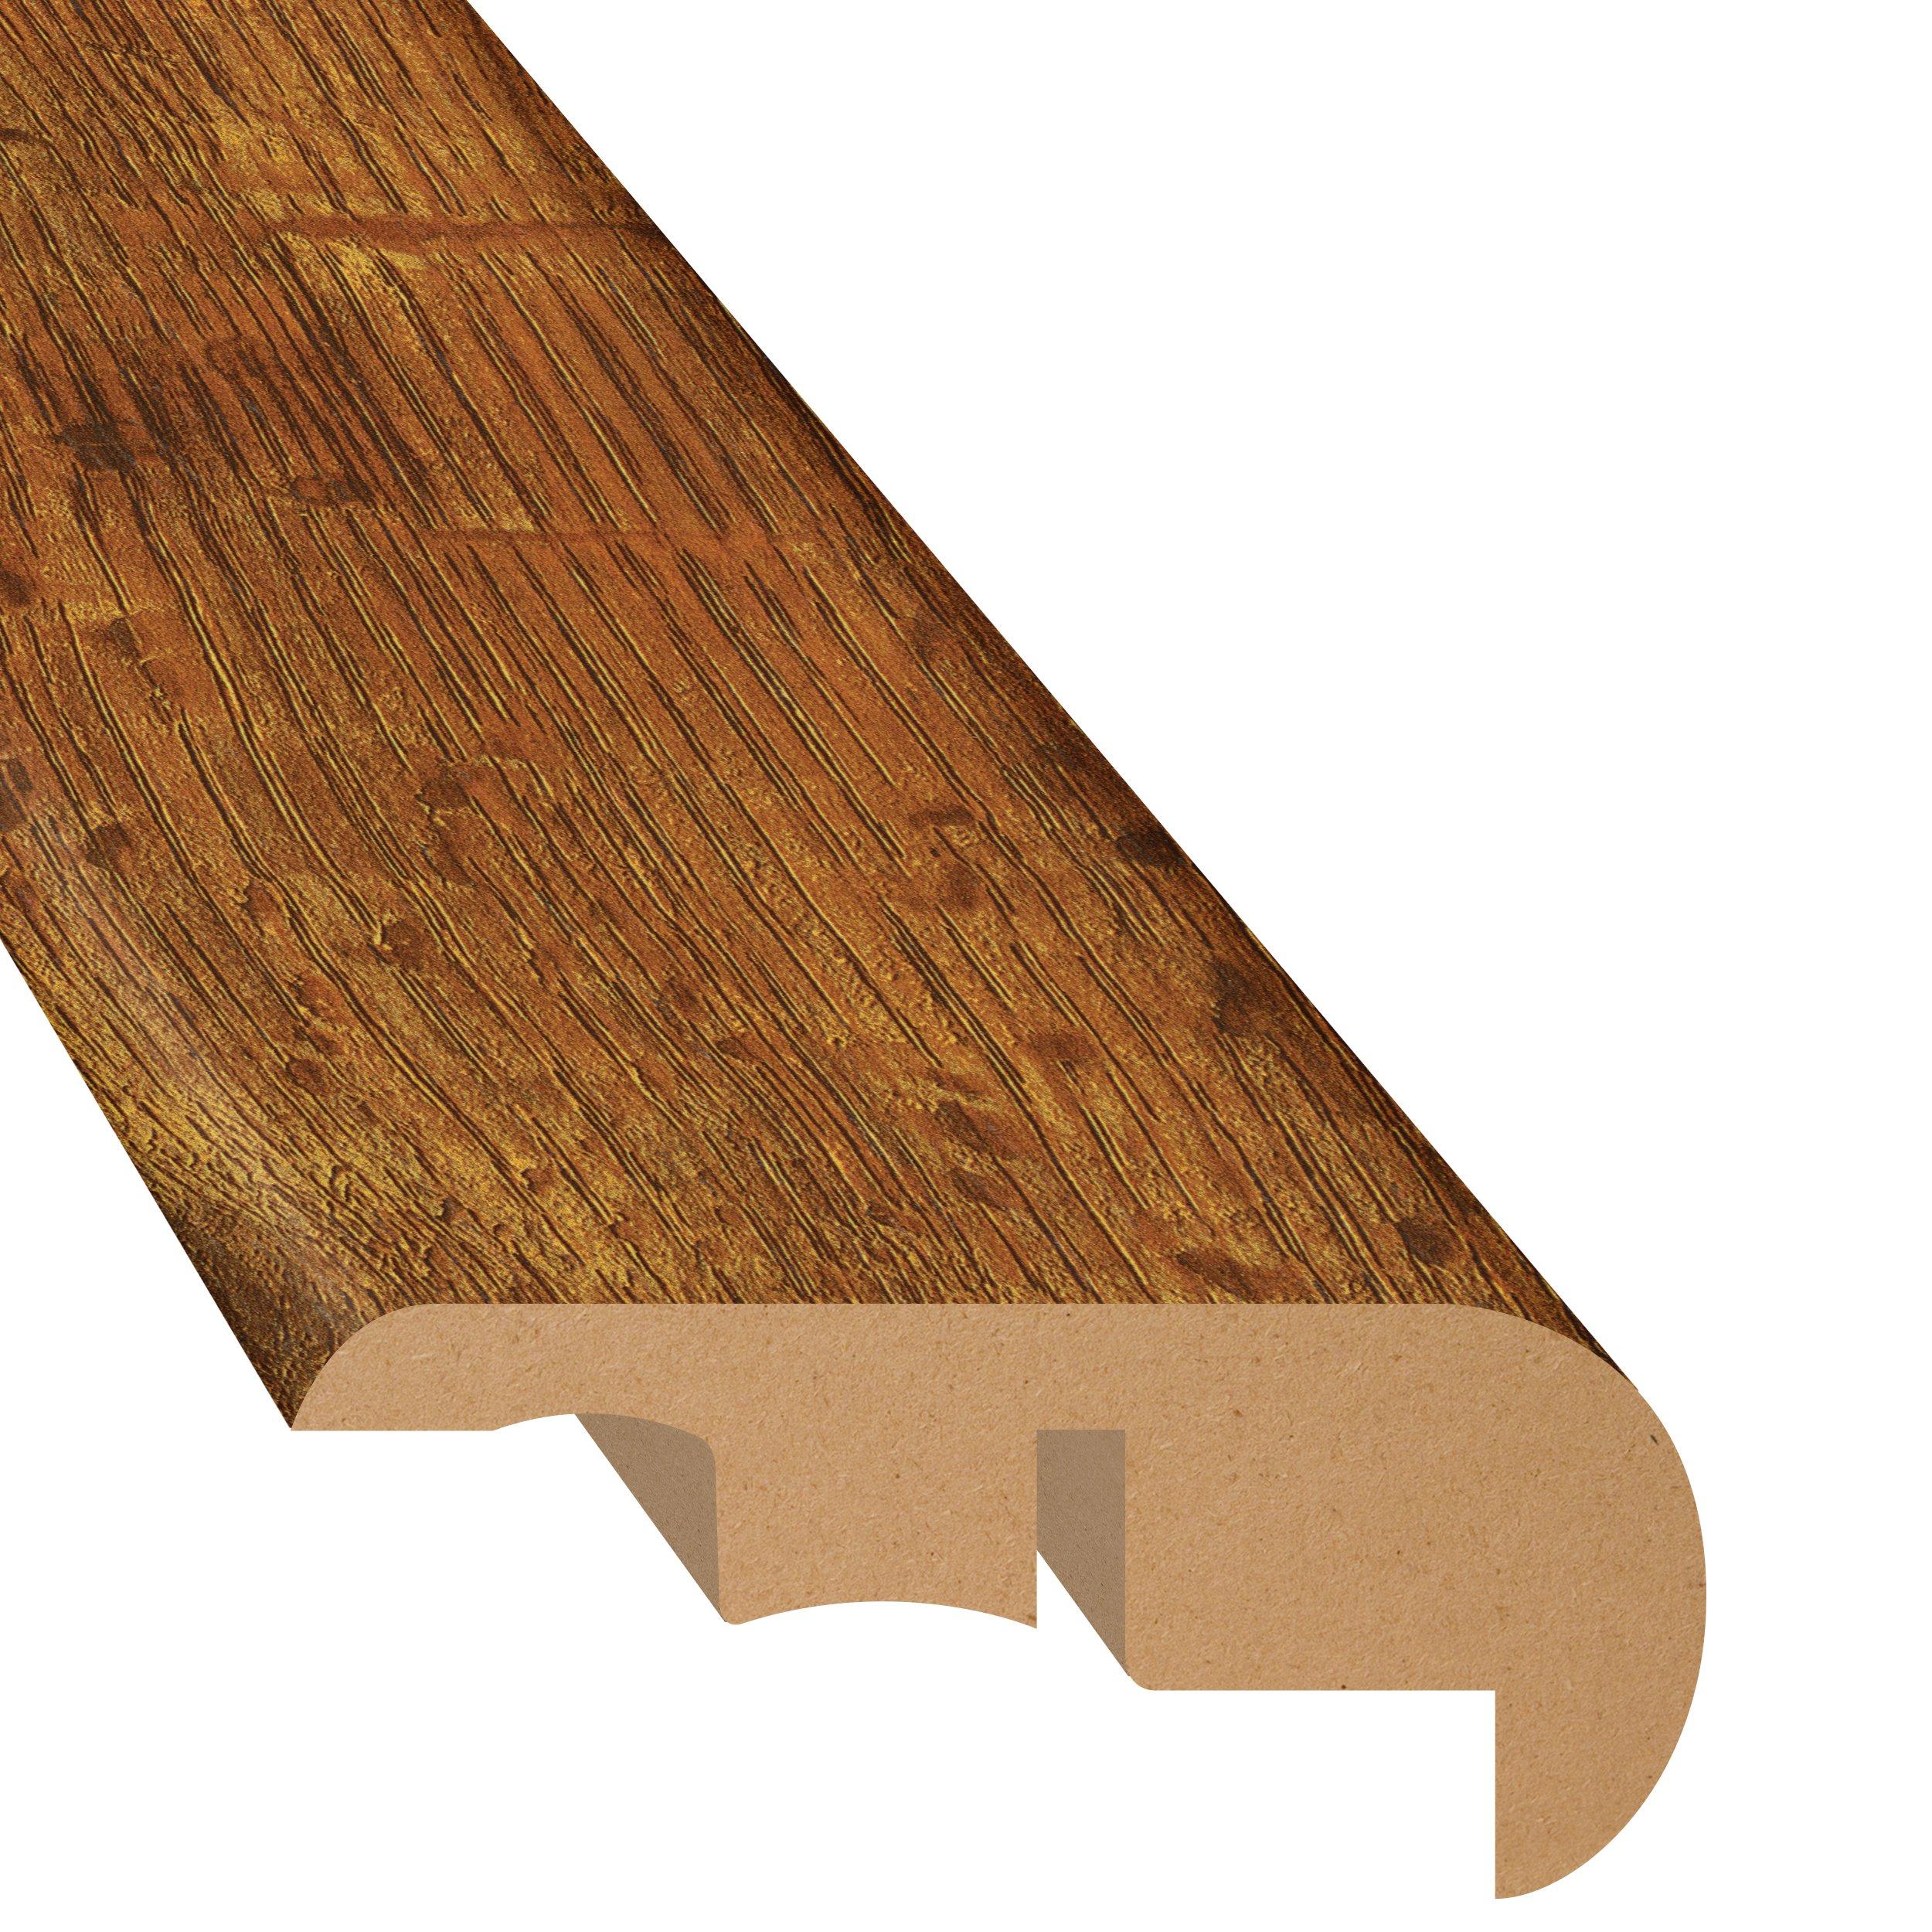 Salemo 94in. Laminate Overlapping Stair Nose